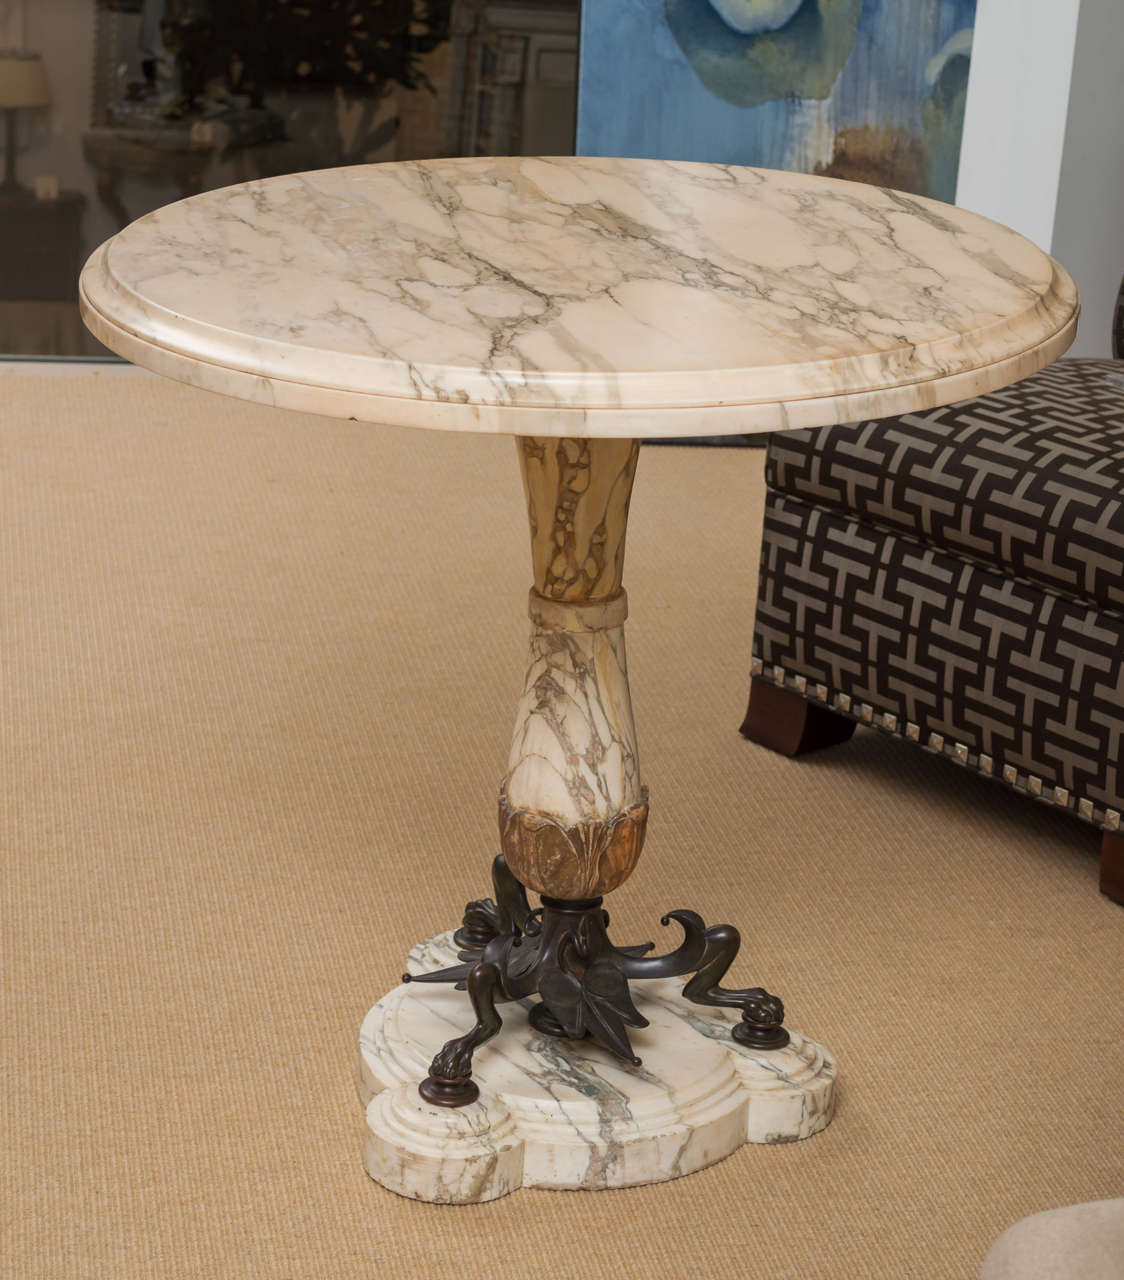 Mid-19th century highly figural faux-marble and bronze Louis Phillipe French pedestal center table with stylized raised tripod and faux marble base supporting beveled edge tabletop.